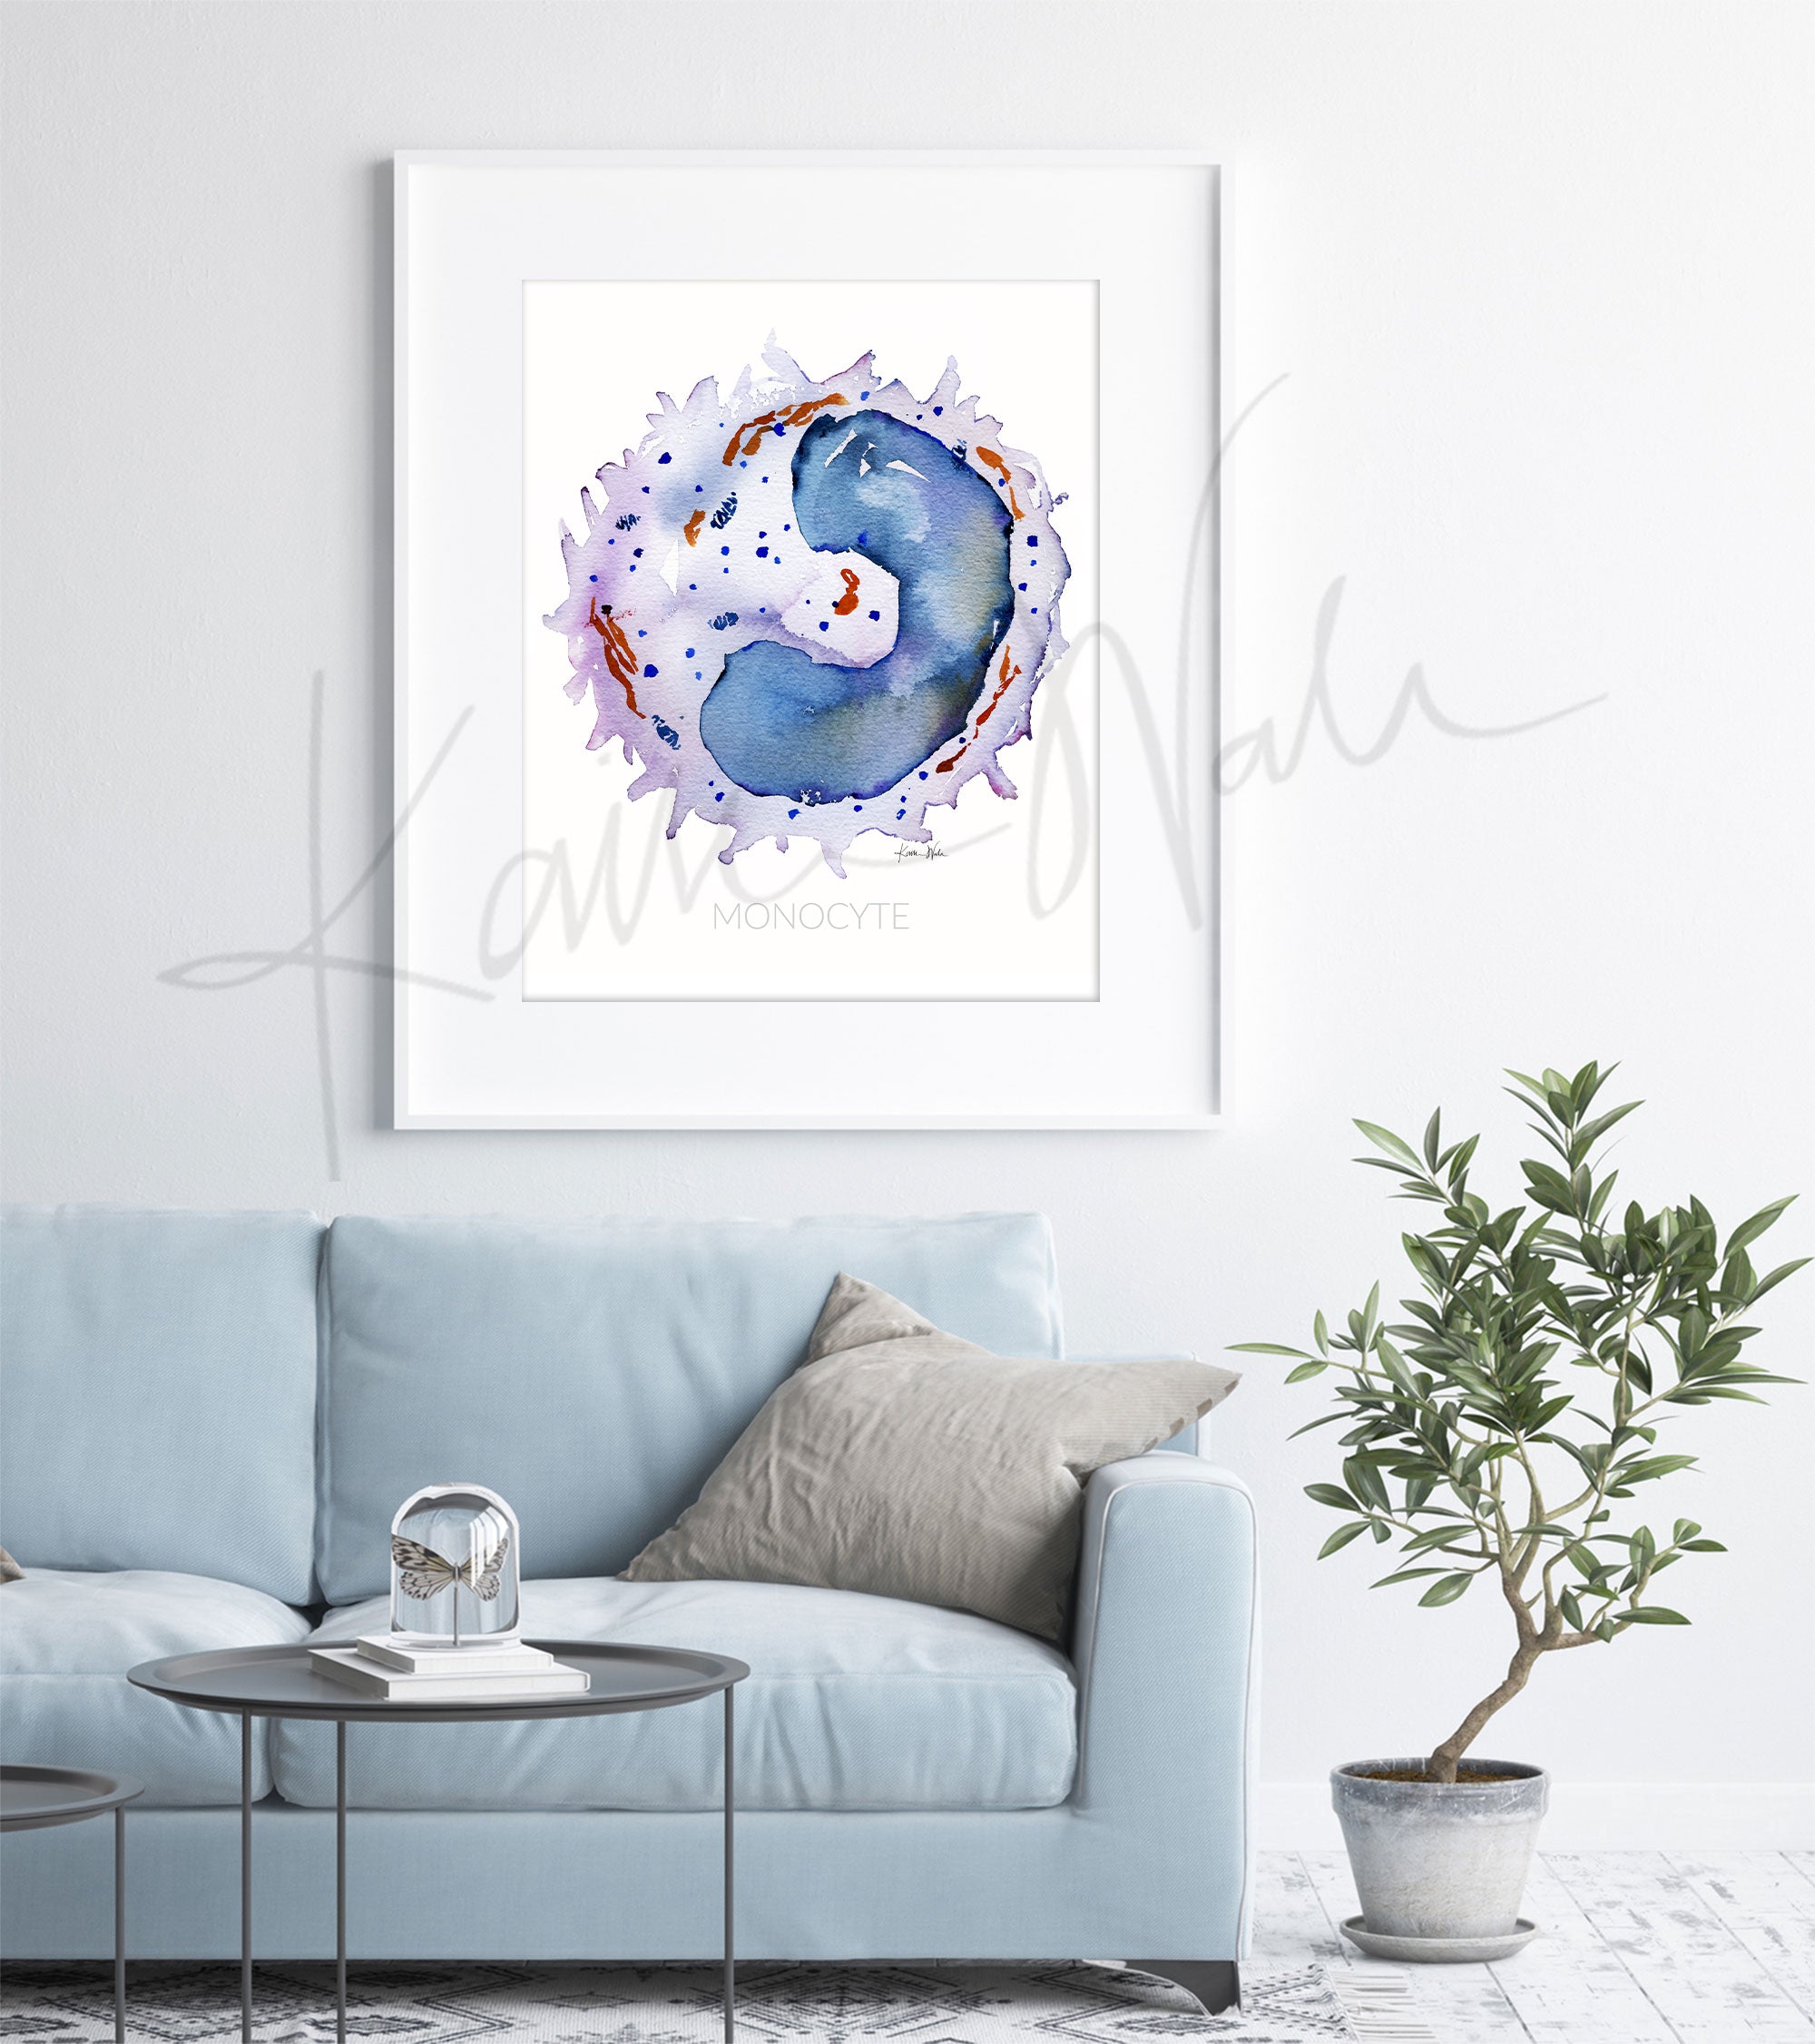 Framed watercolor painting of a monocyte white blood cell. The painting is hanging over a blue couch.